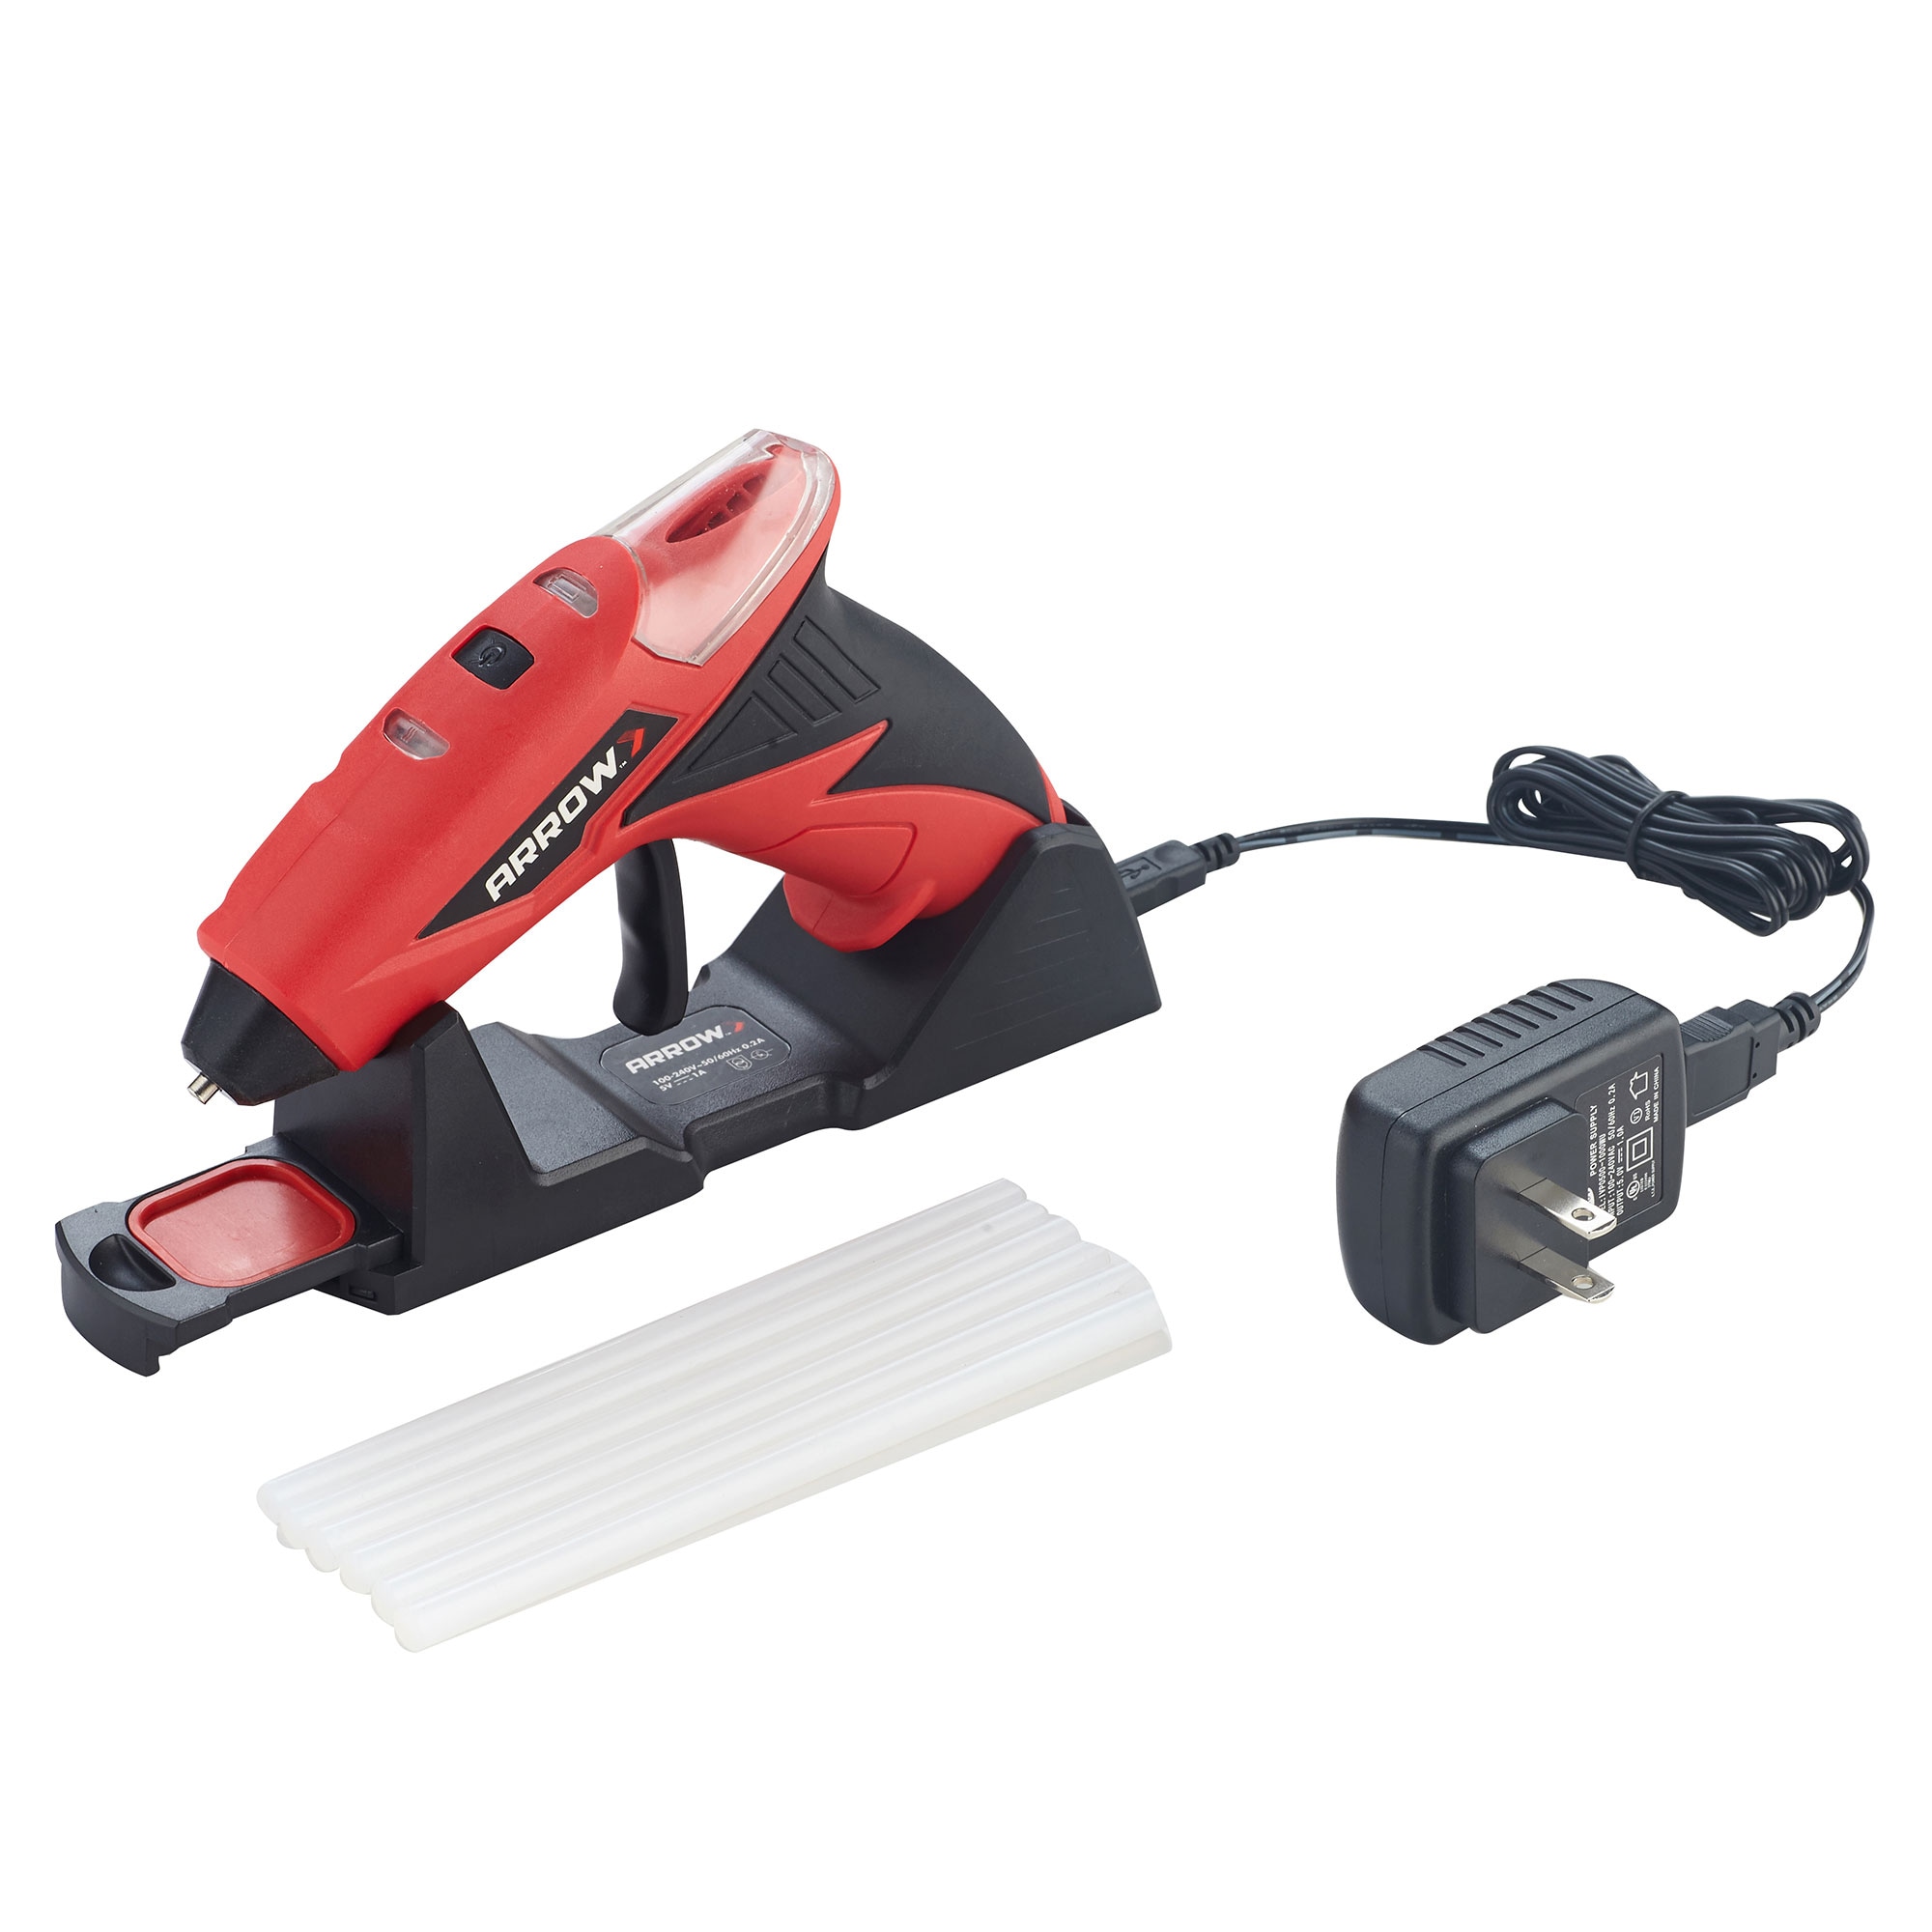 Cordless glue gun with 20V and 11mm thick glue stick, by Aisha Afxxal